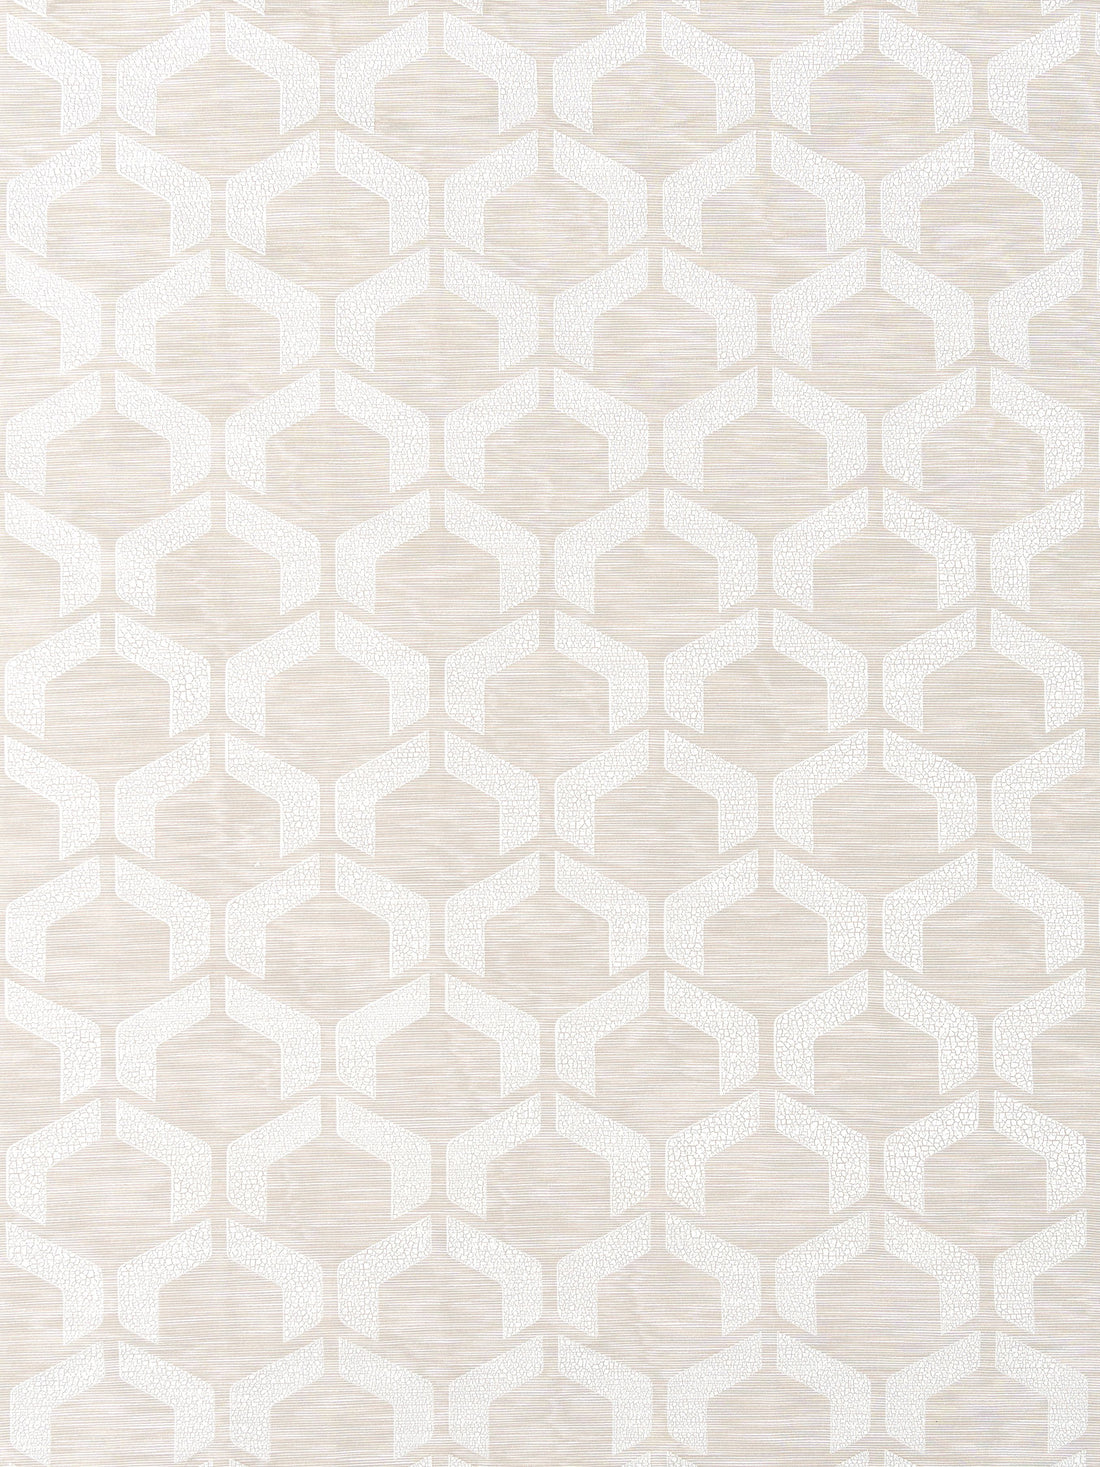 Craquele fabric in ivory color - pattern number DB 0002D297 - by Scalamandre in the Old World Weavers collection